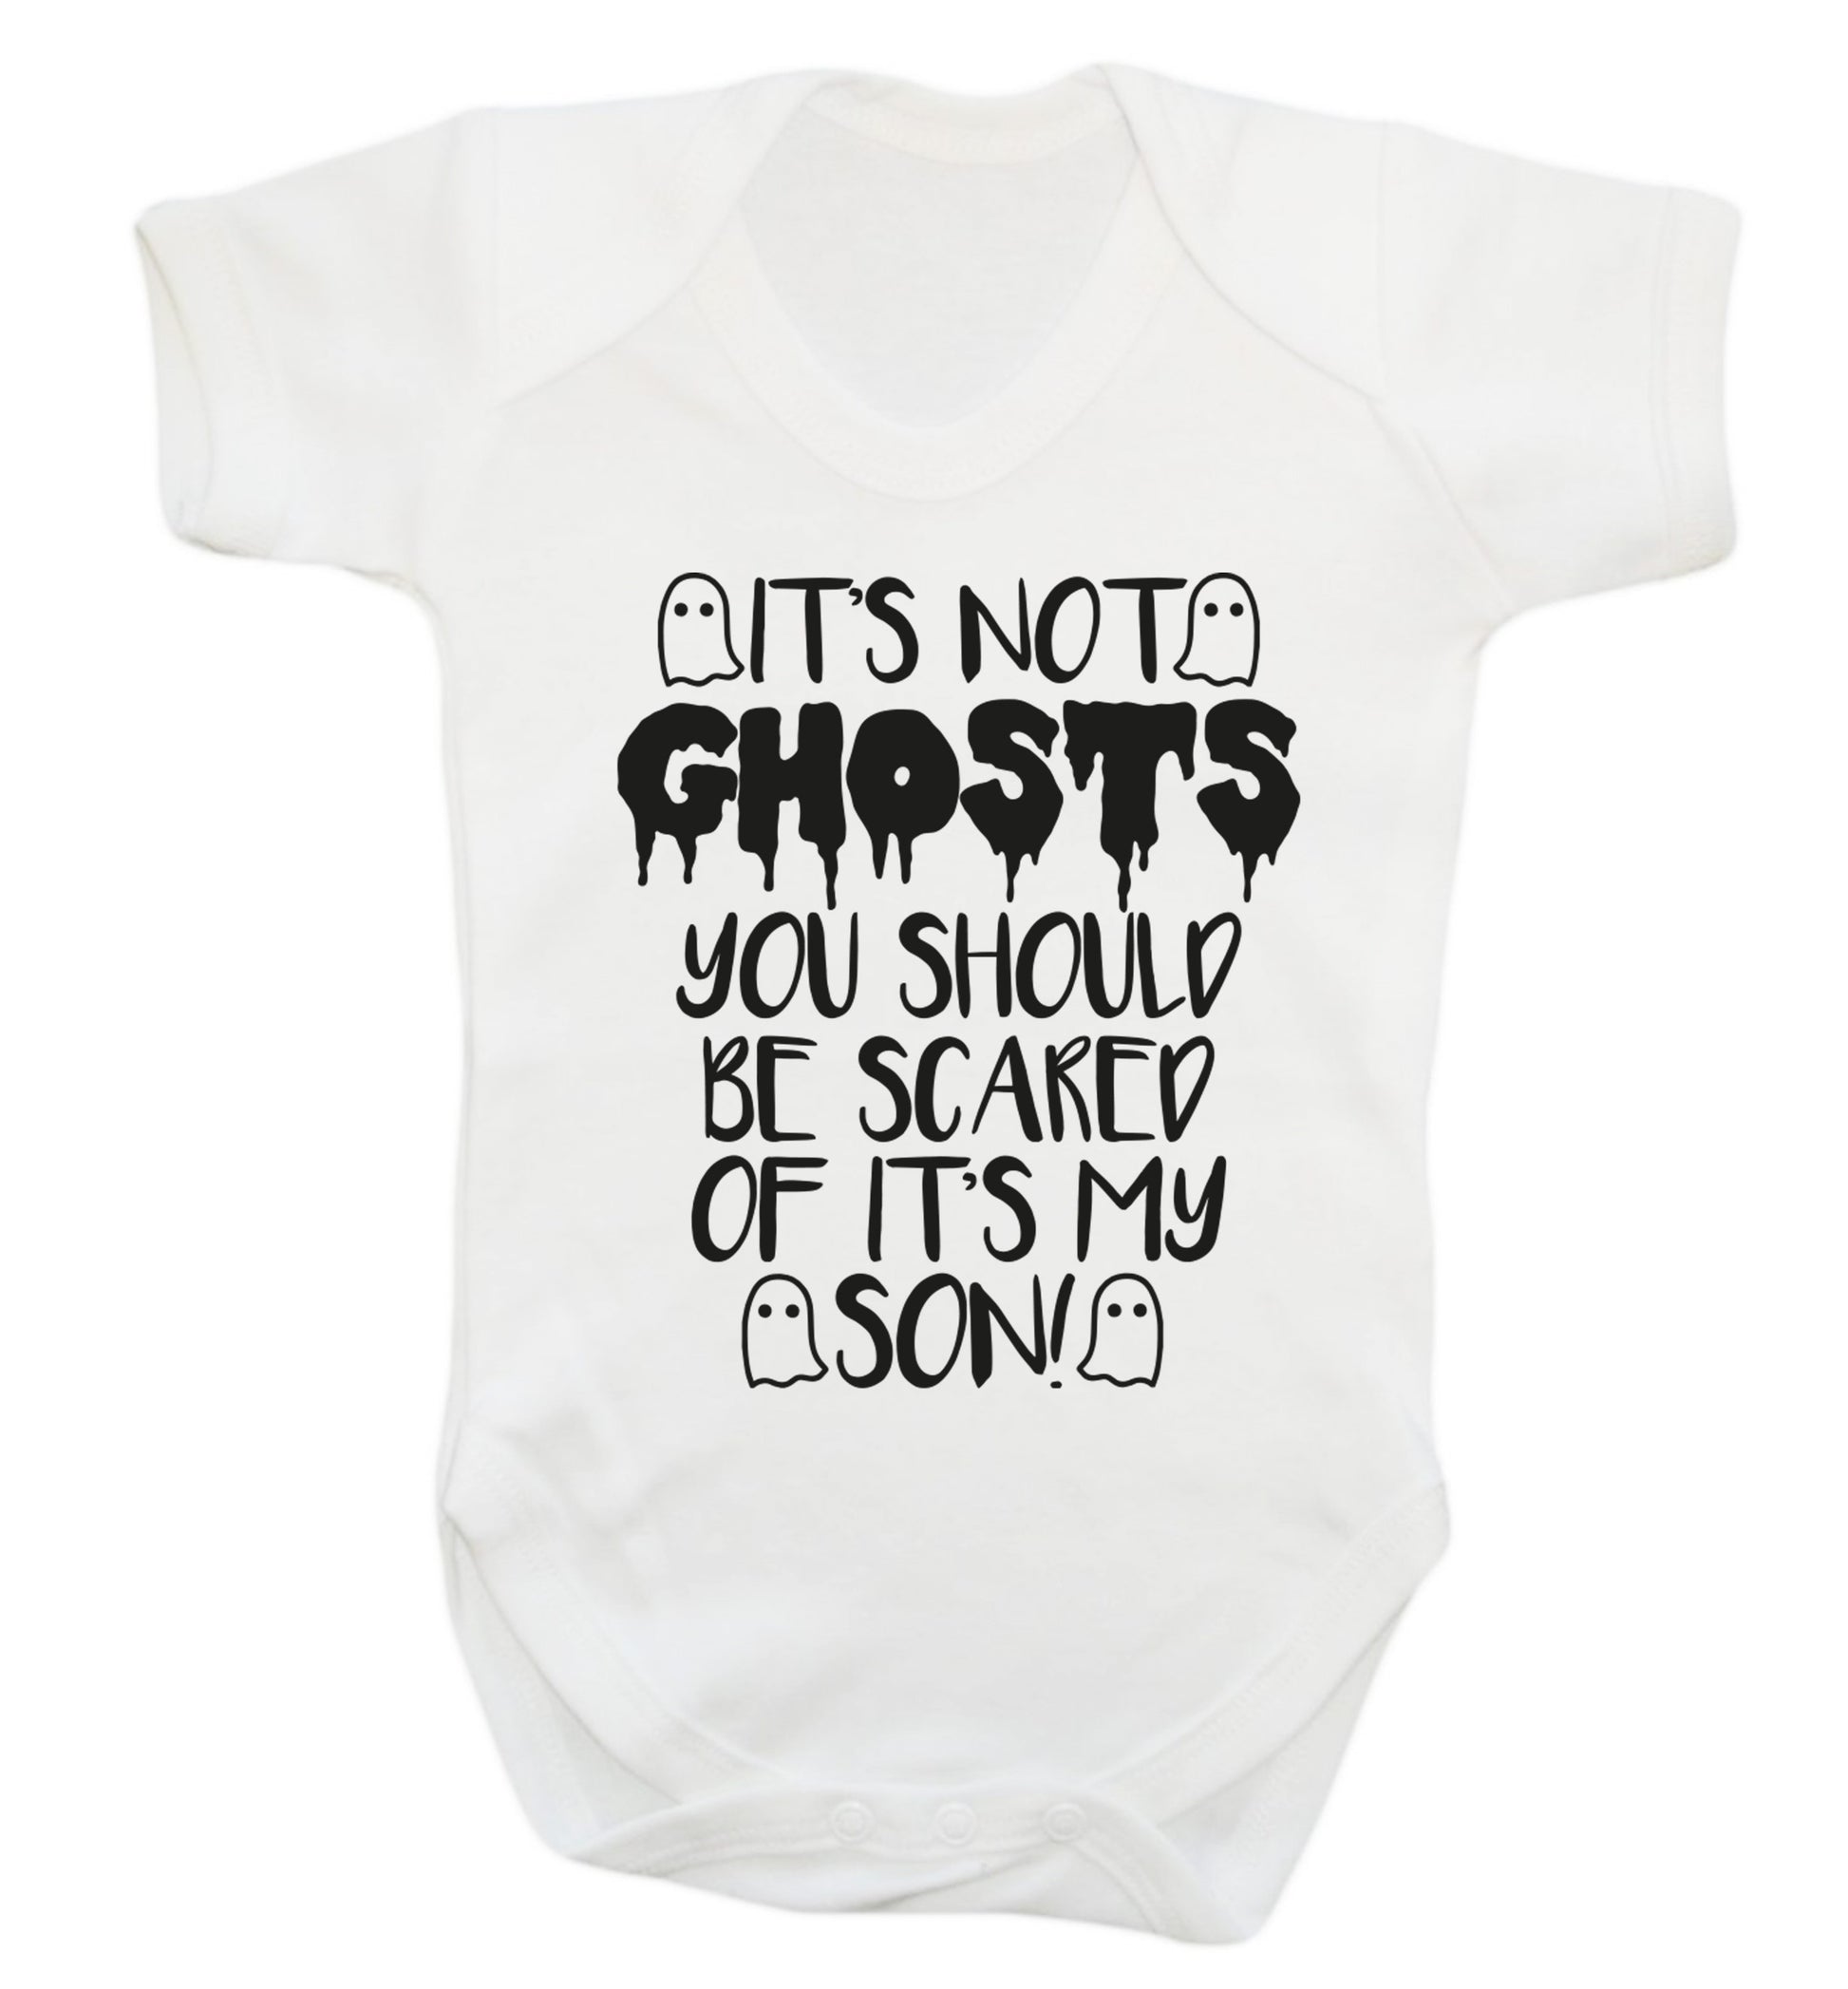 It's not ghosts you should be scared of it's my son! Baby Vest white 18-24 months